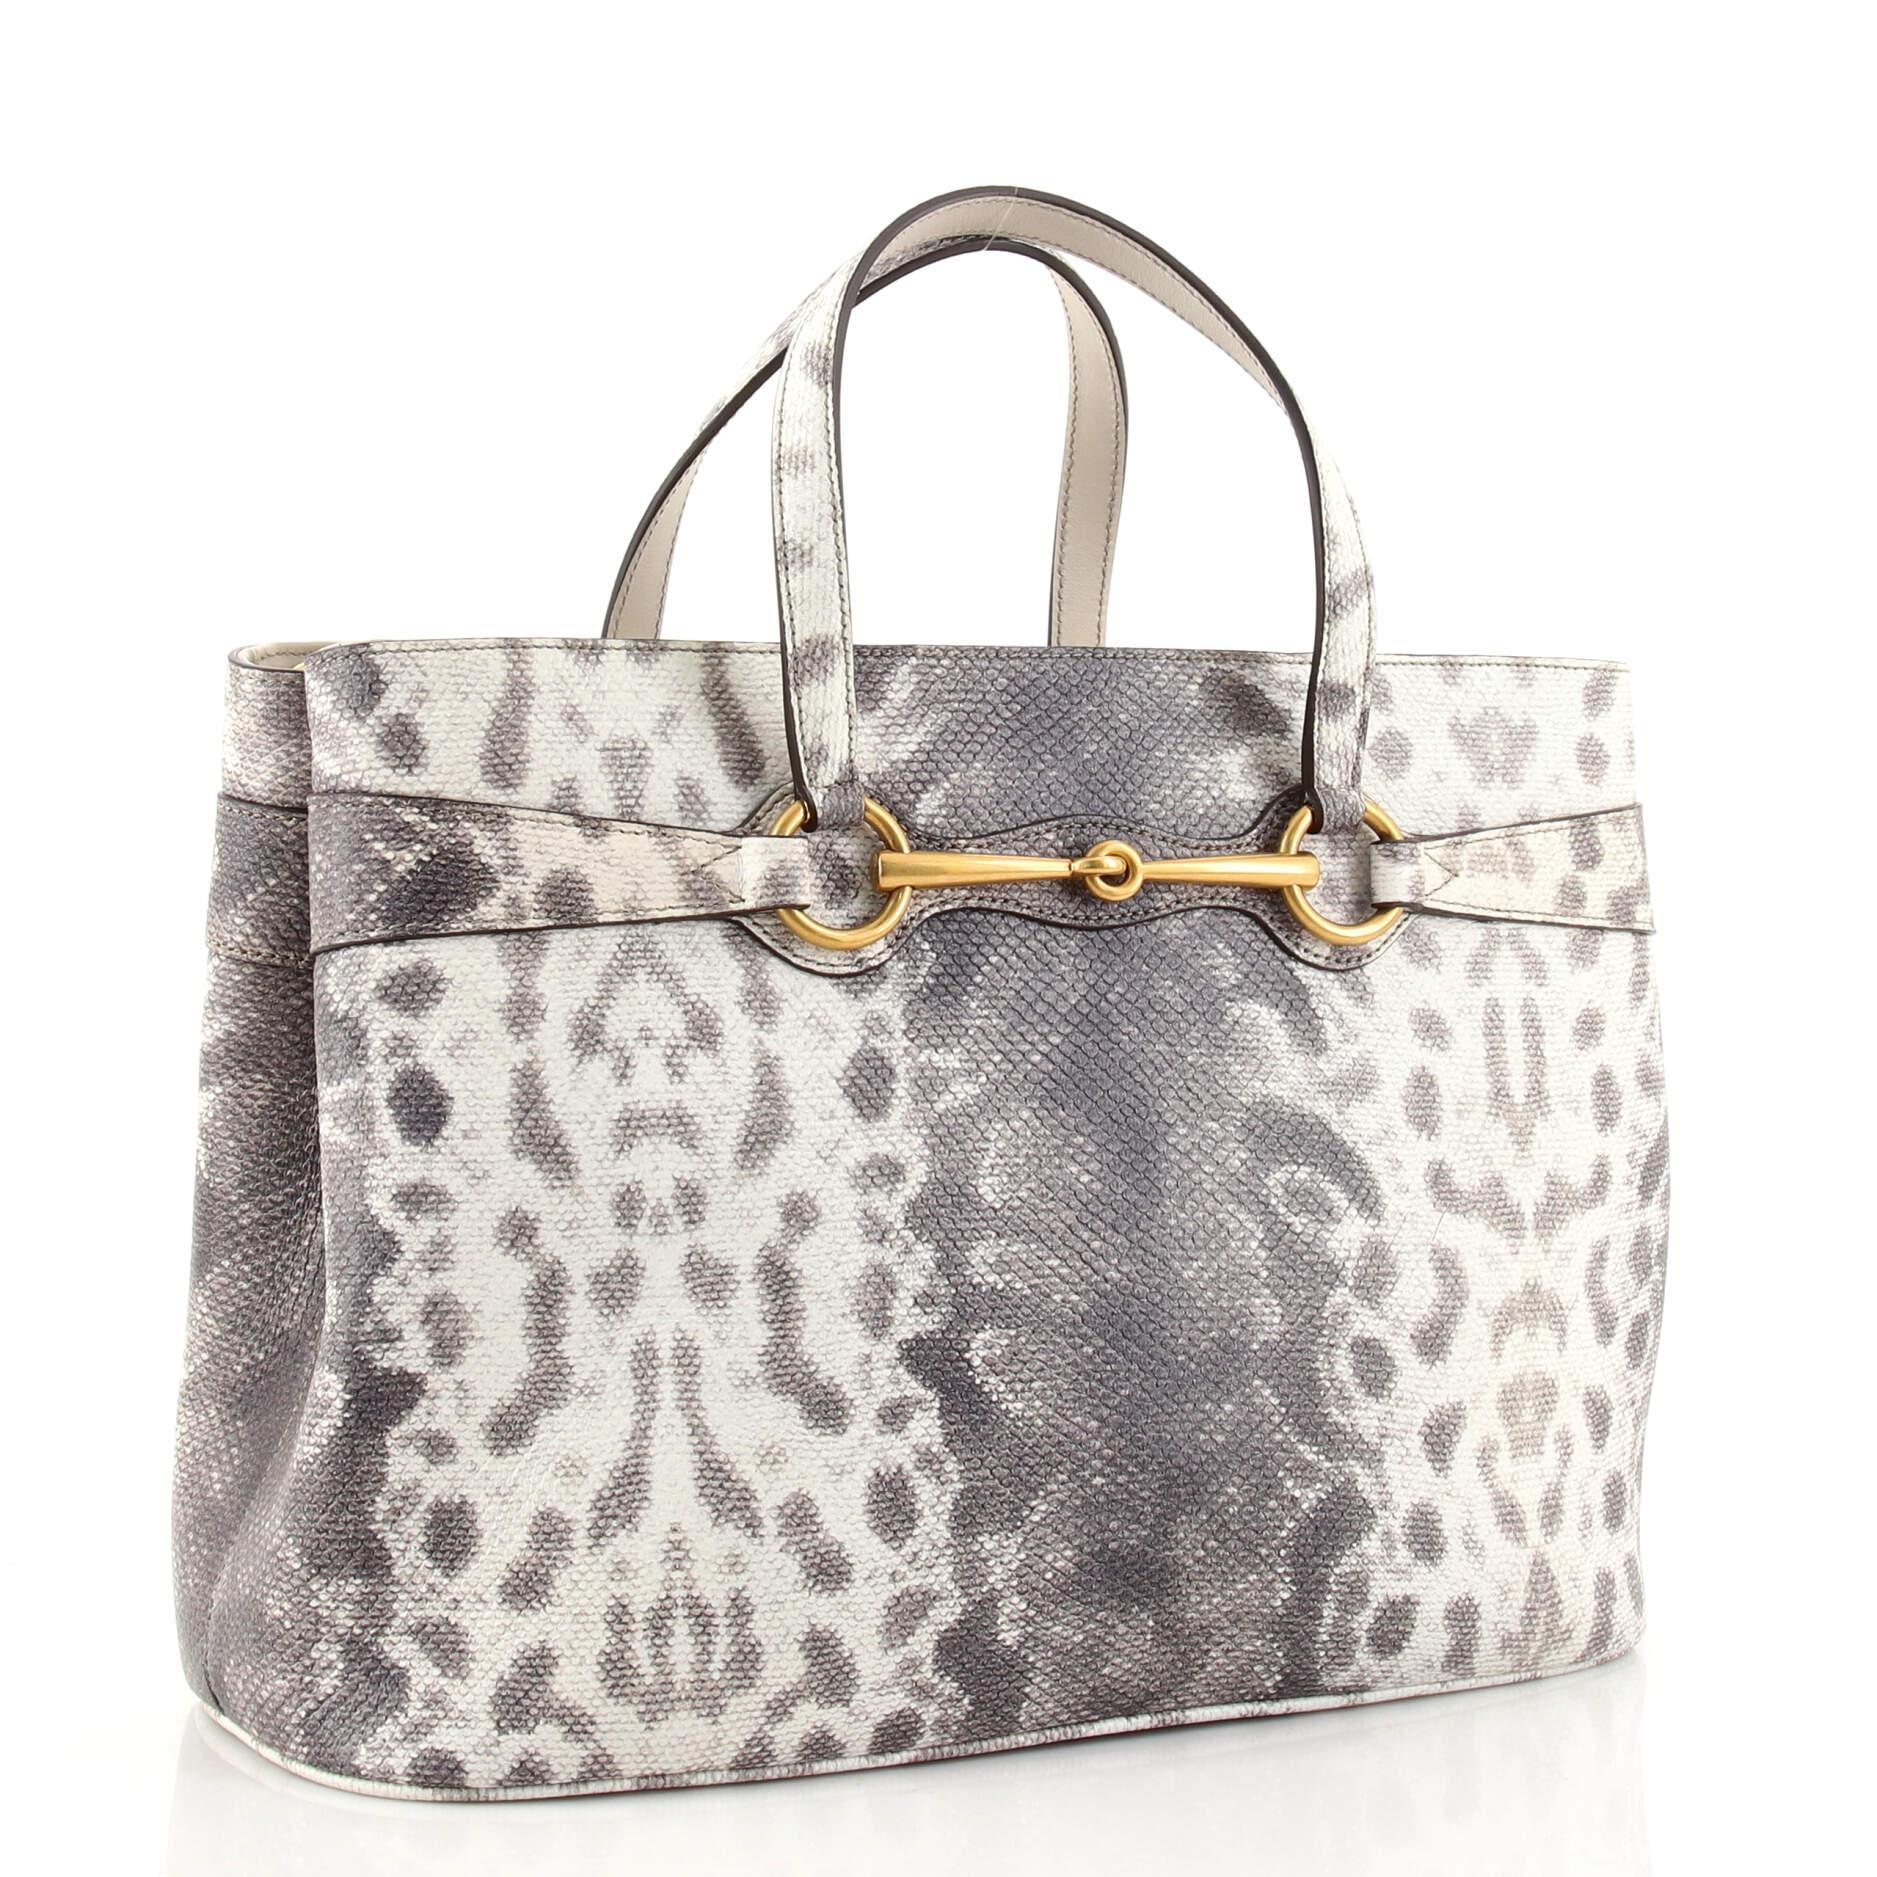 Gray Gucci Bright Bit Convertible Tote Python Embossed Leather Medium